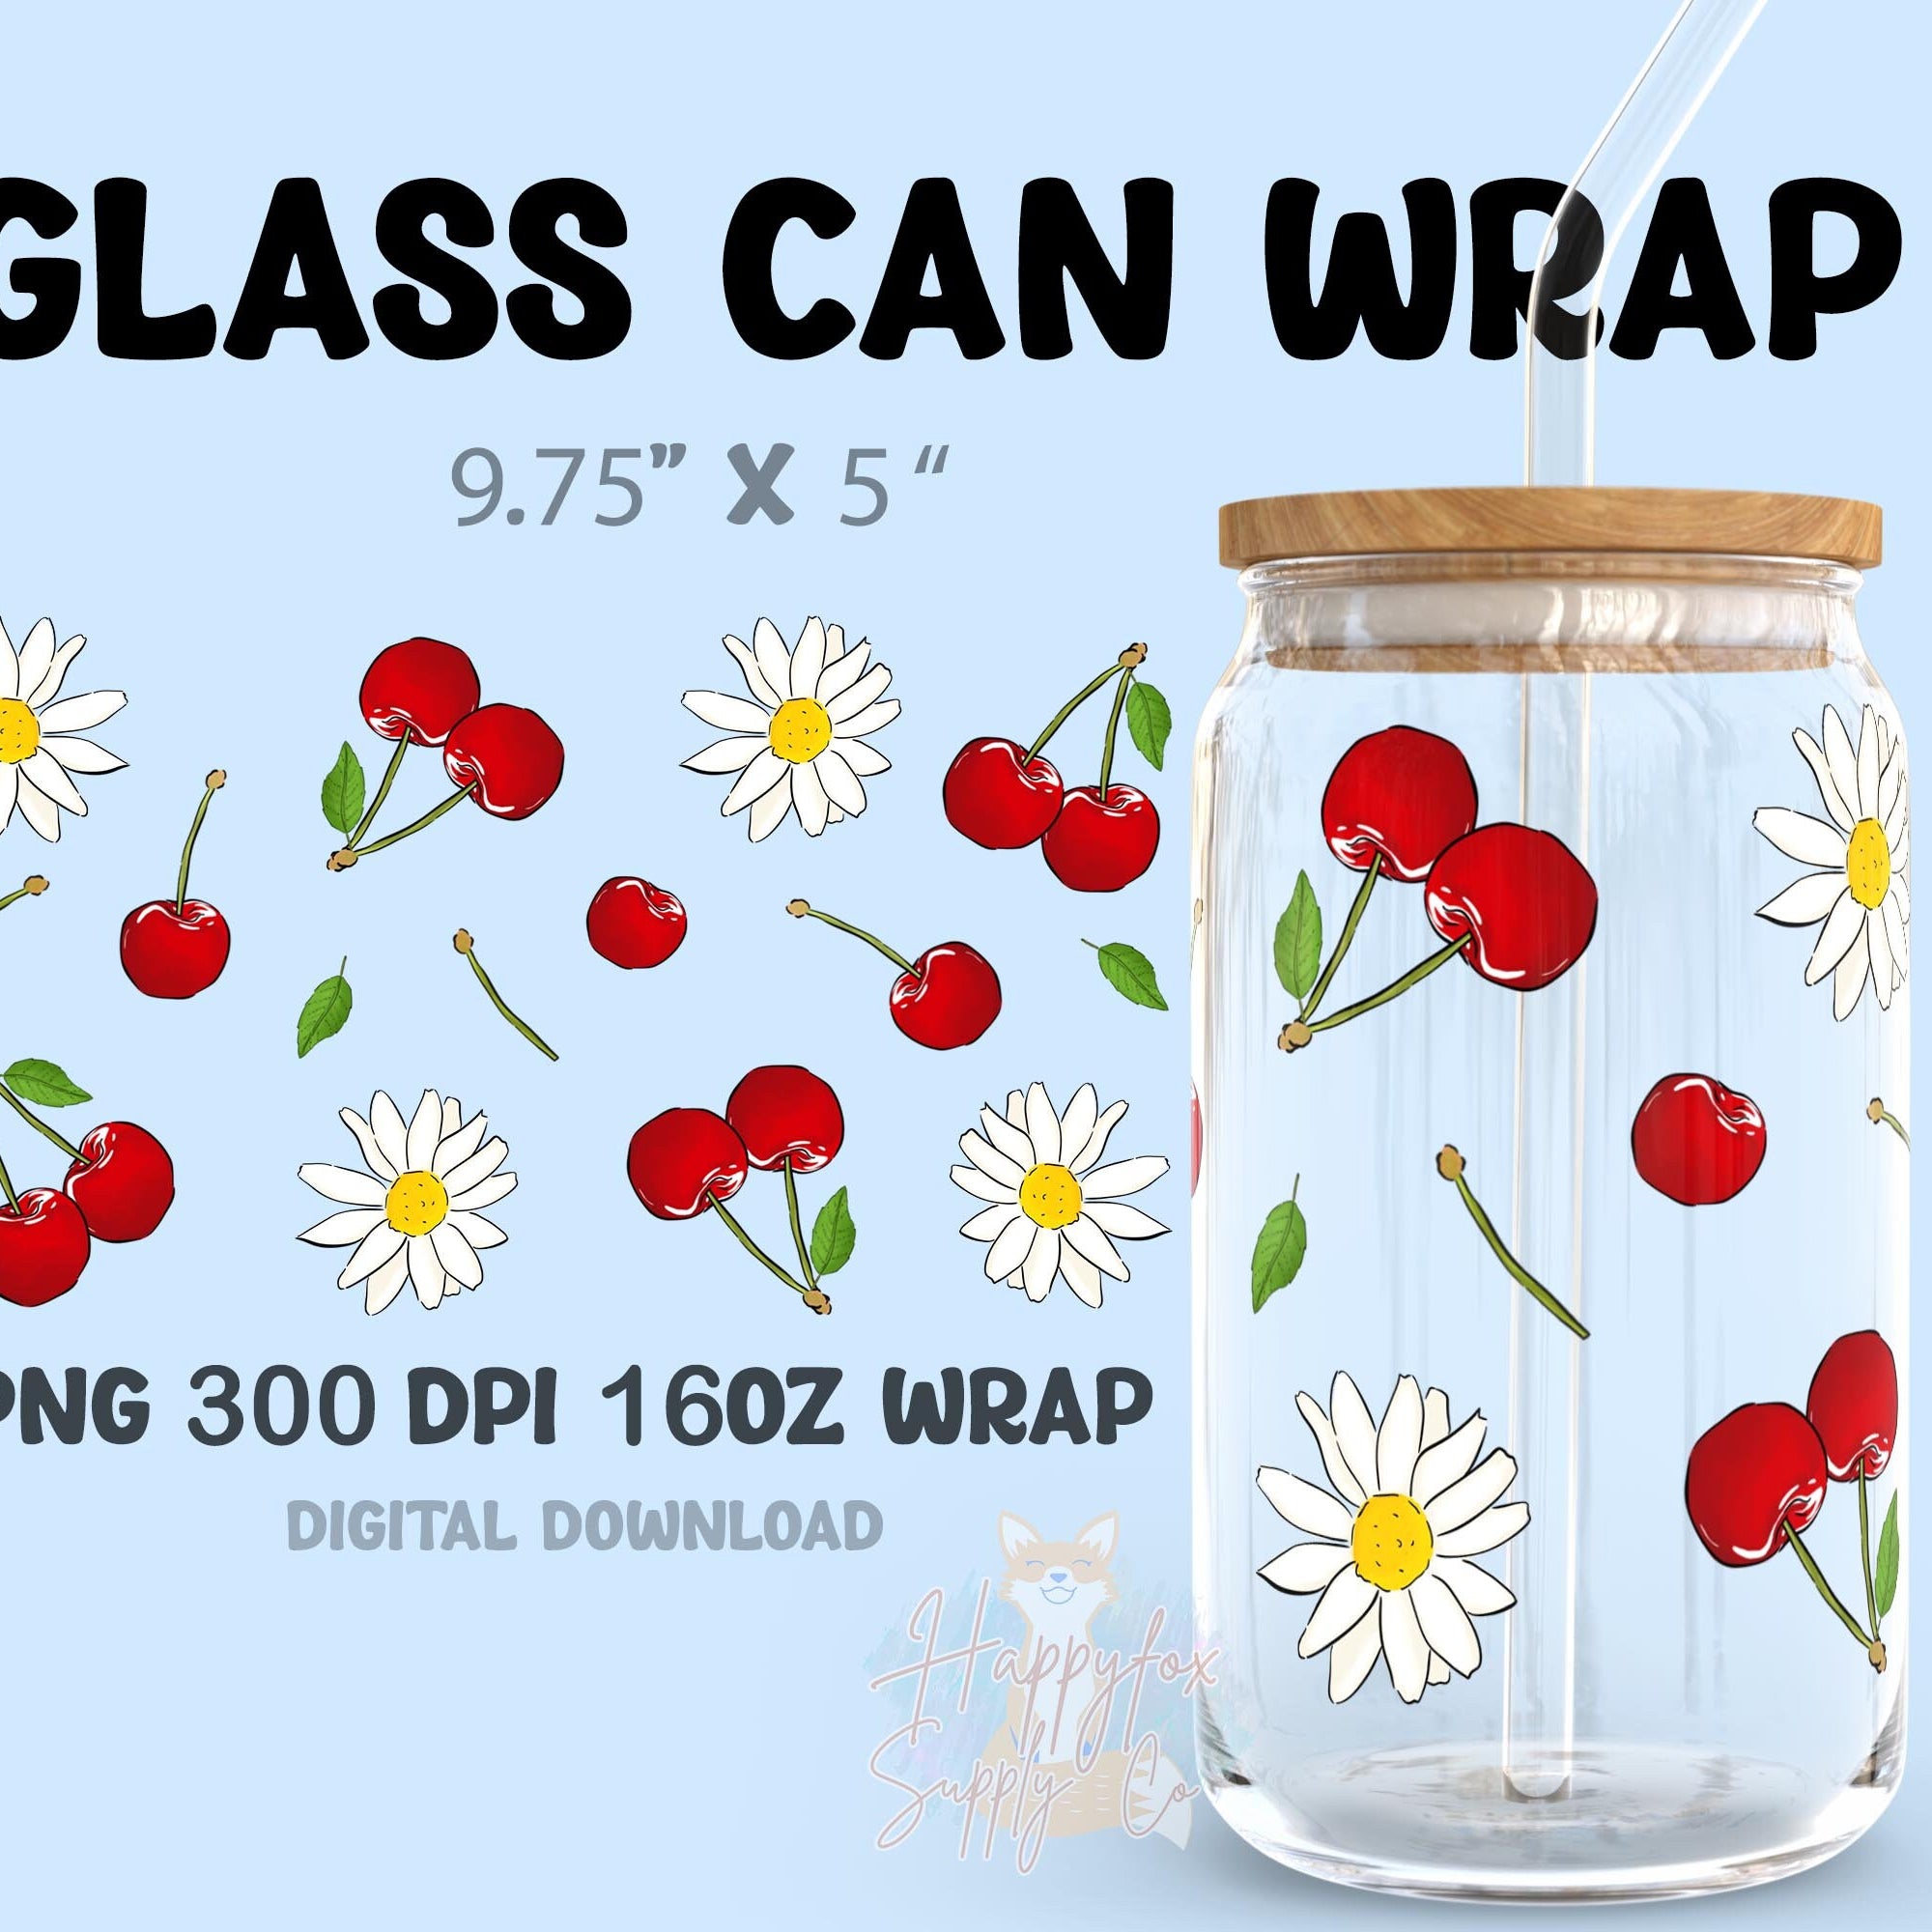 Digital File 16oz Glass Can Wrap 300 DPI .PNG Cherries Daisies UVDTF Sublimation Printed Vinyl Transparent 16oz Wrap Spring Cherries Daisies